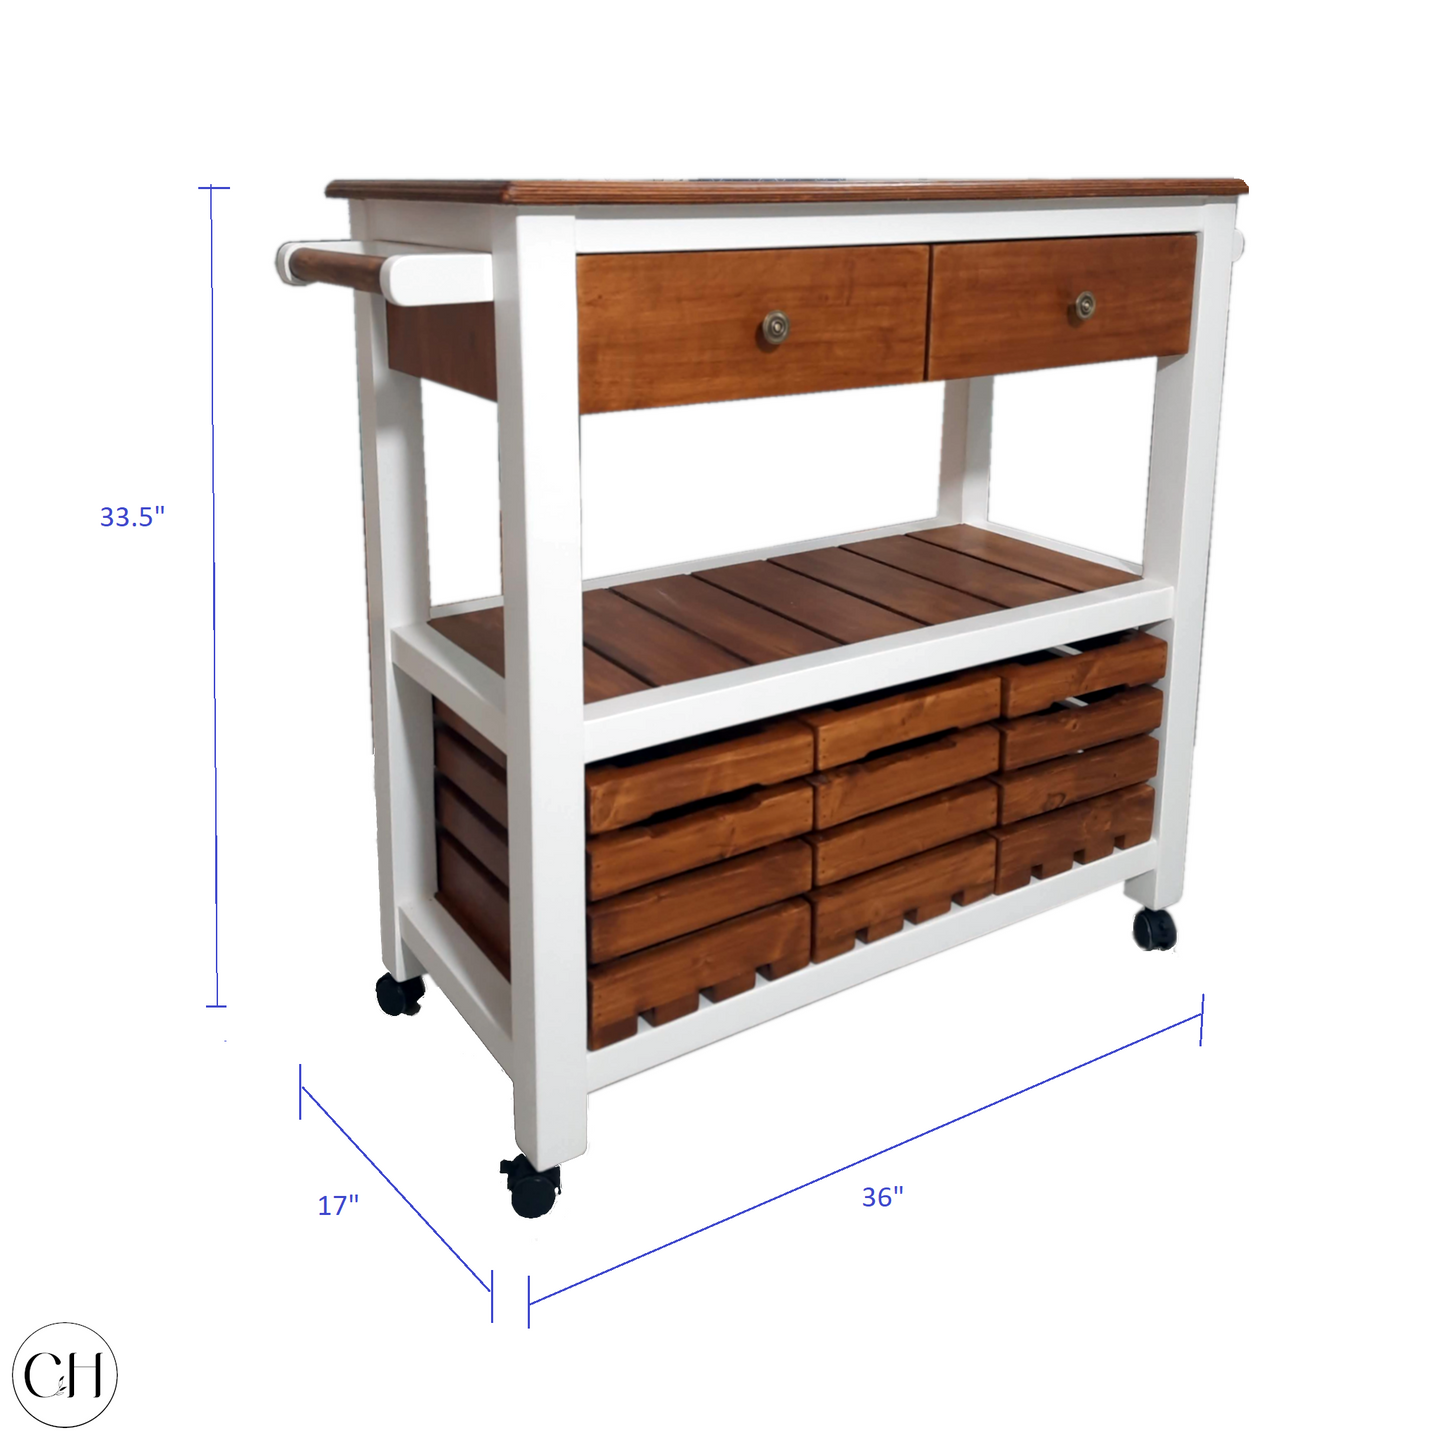 CustHum Belfast - Kitchen island trolley with 2 drawers, open middle self, 3 removable crates (dimensions)